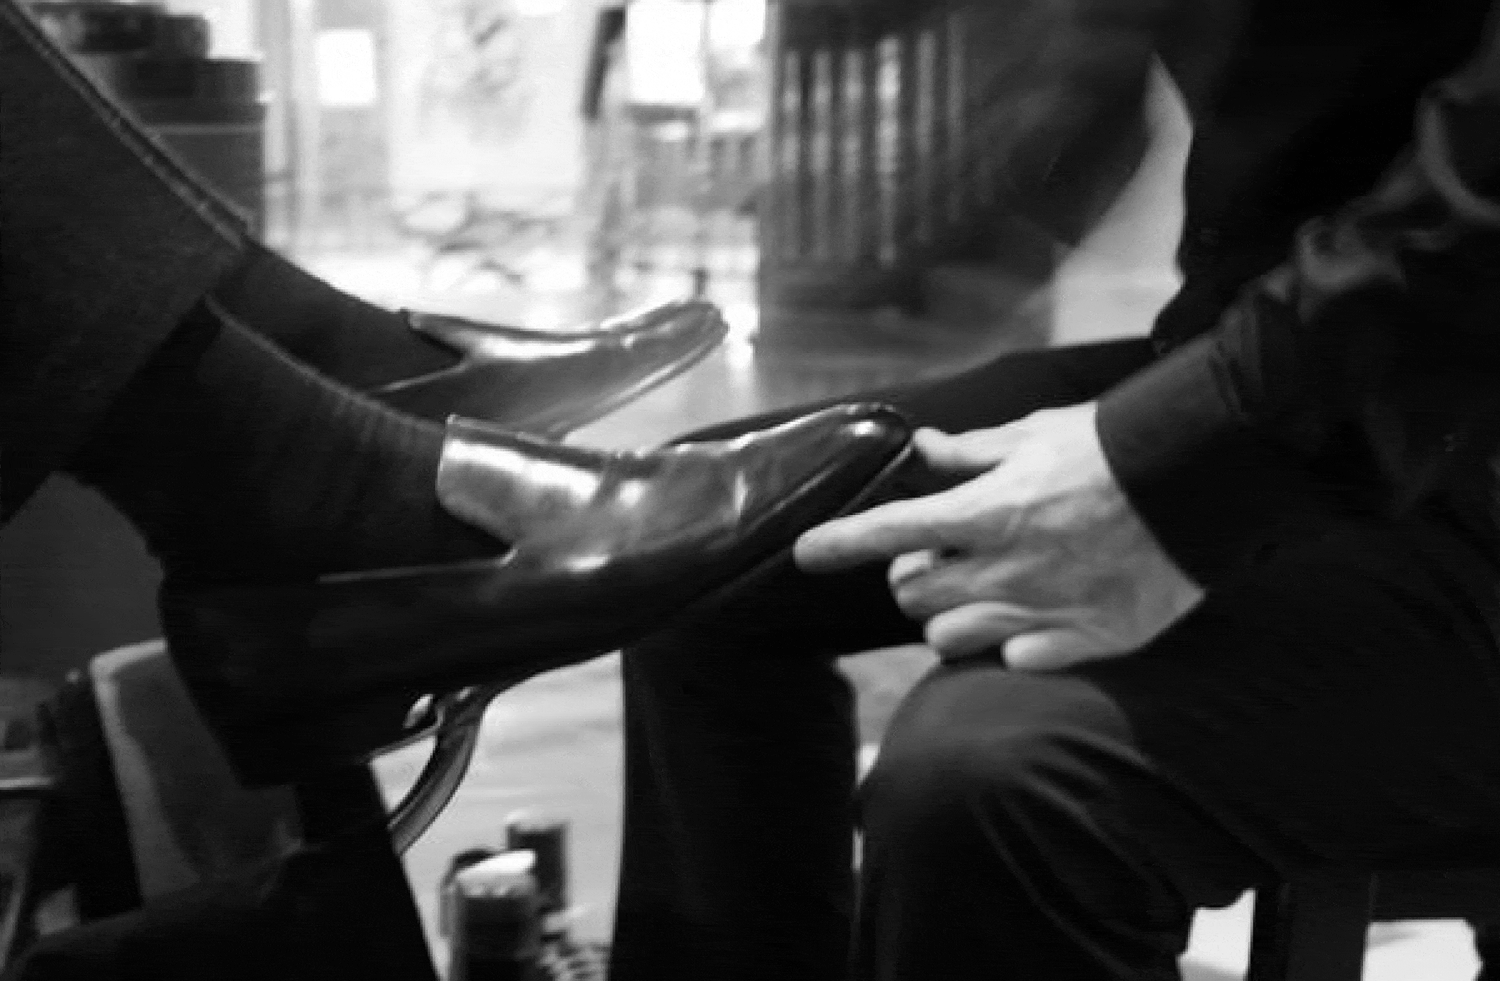 Shoe care and shoe shining - The complete guide 